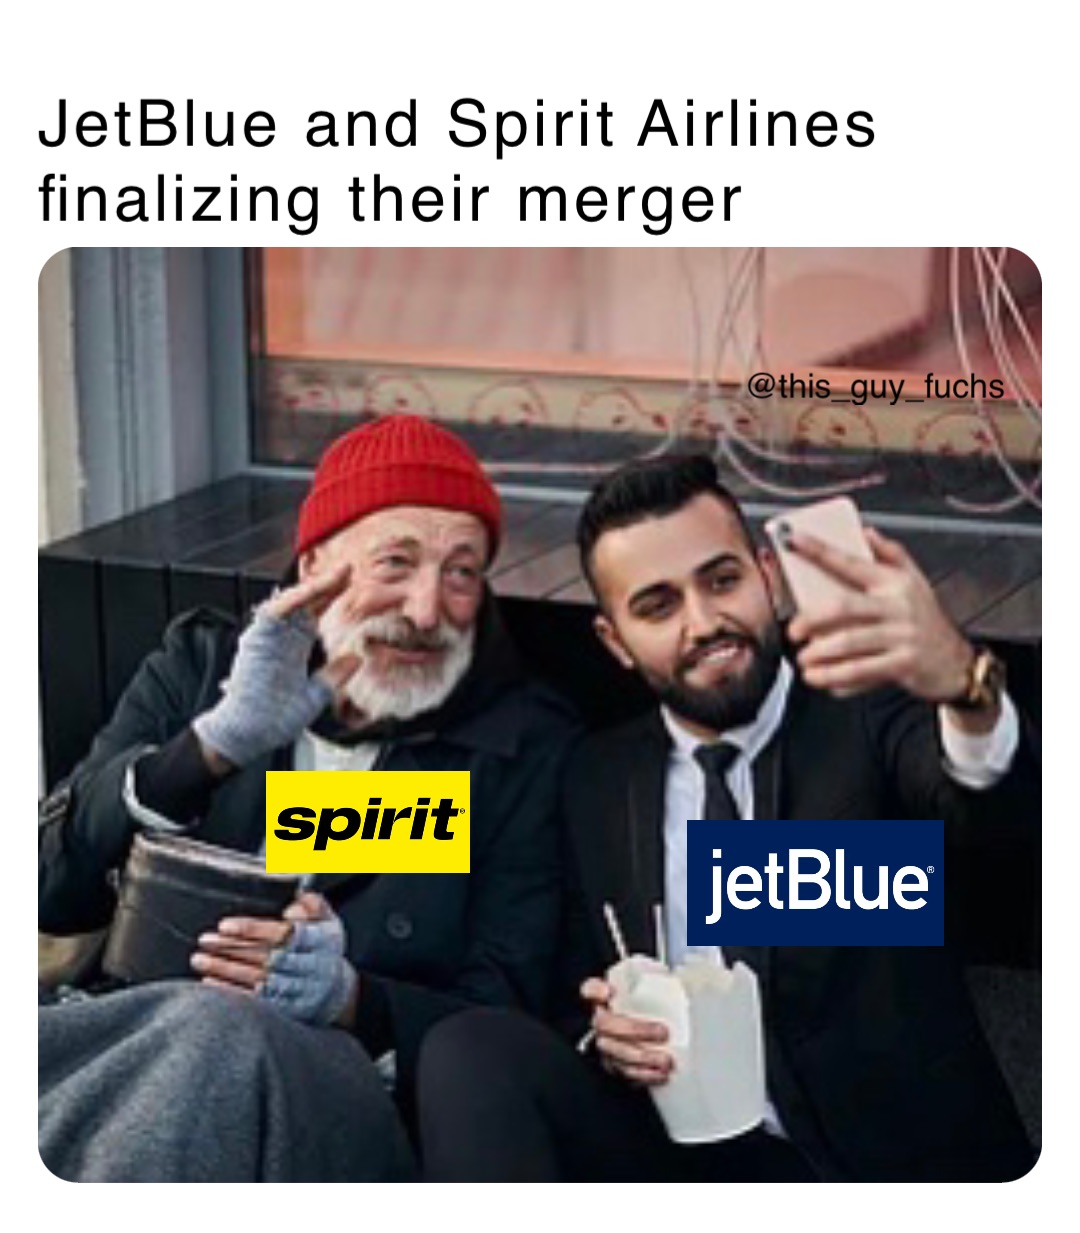 JetBlue and Spirit Airlines finalizing their merger